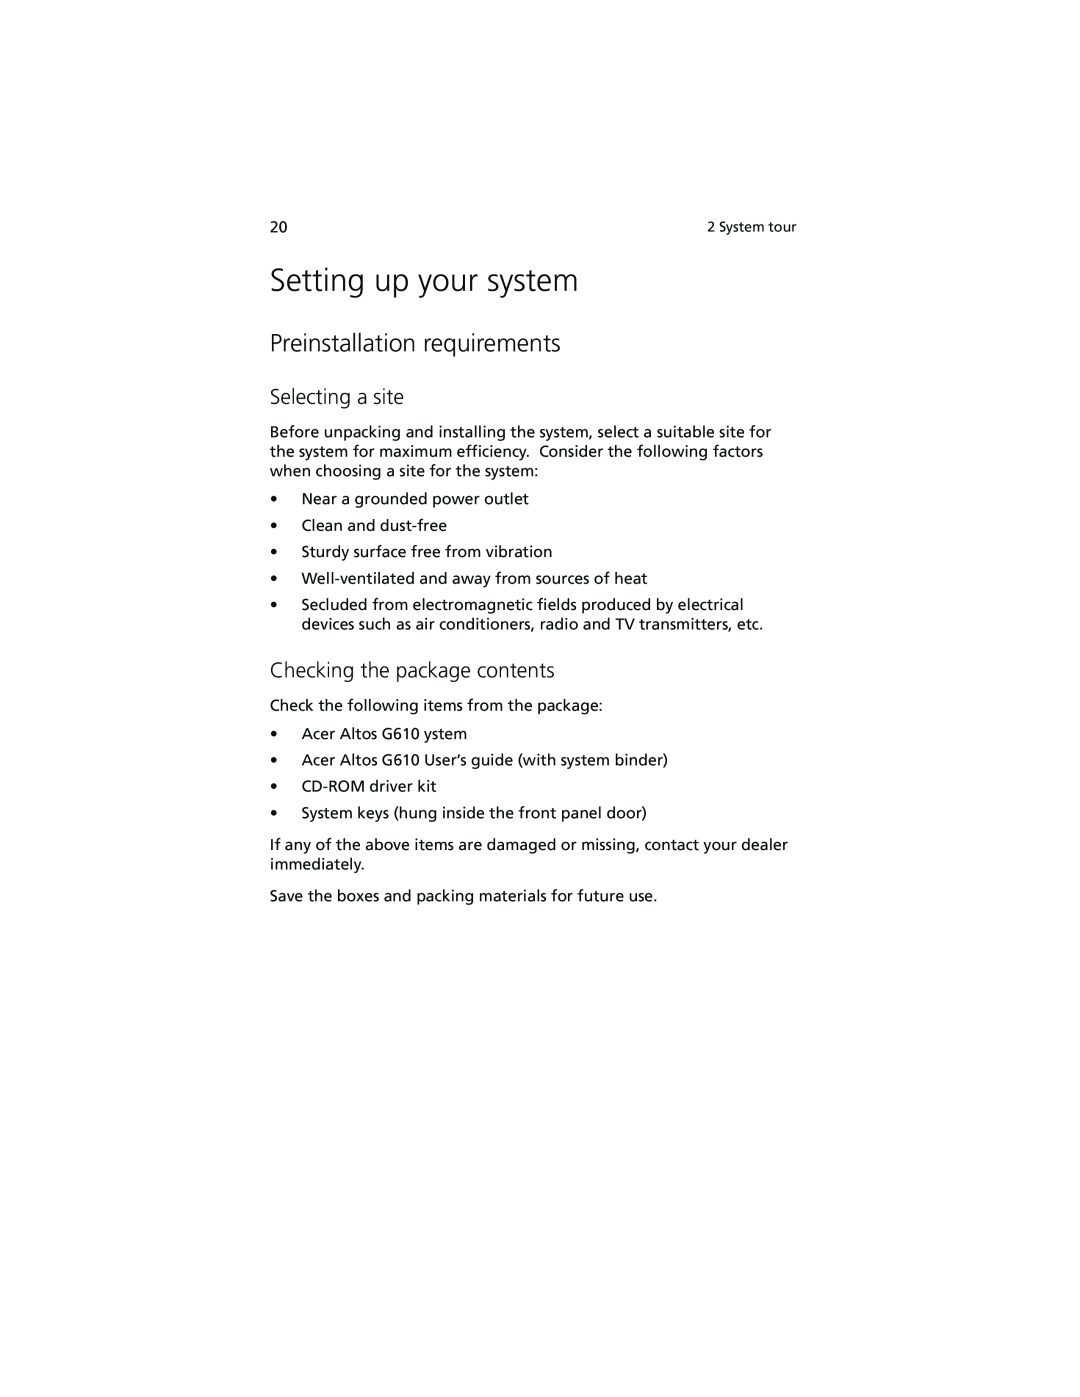 Acer Altos G610 Setting up your system, Preinstallation requirements, Selecting a site, Checking the package contents 